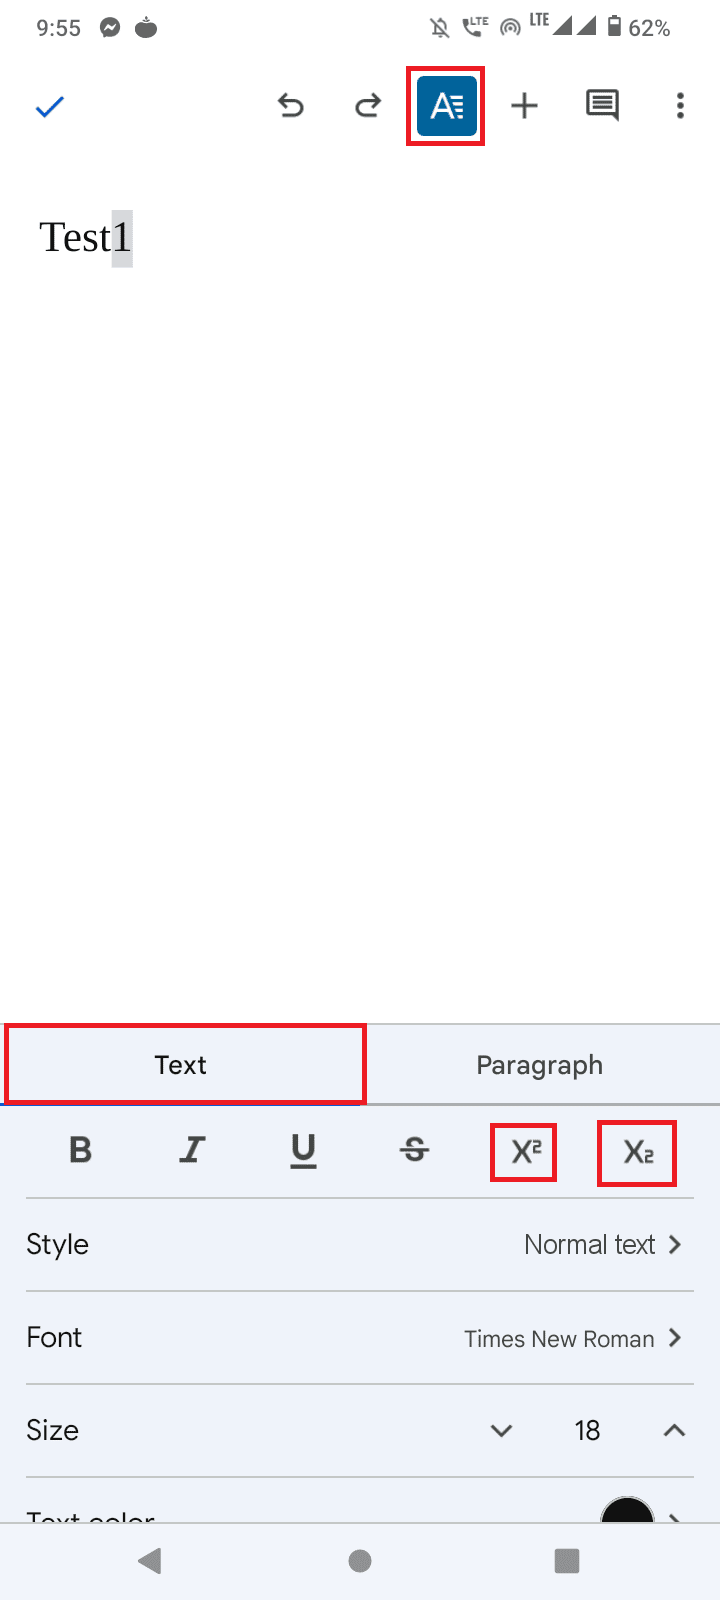 go to the Text tab and tap on X¬2 to enter superscript and X2 to enter subscript